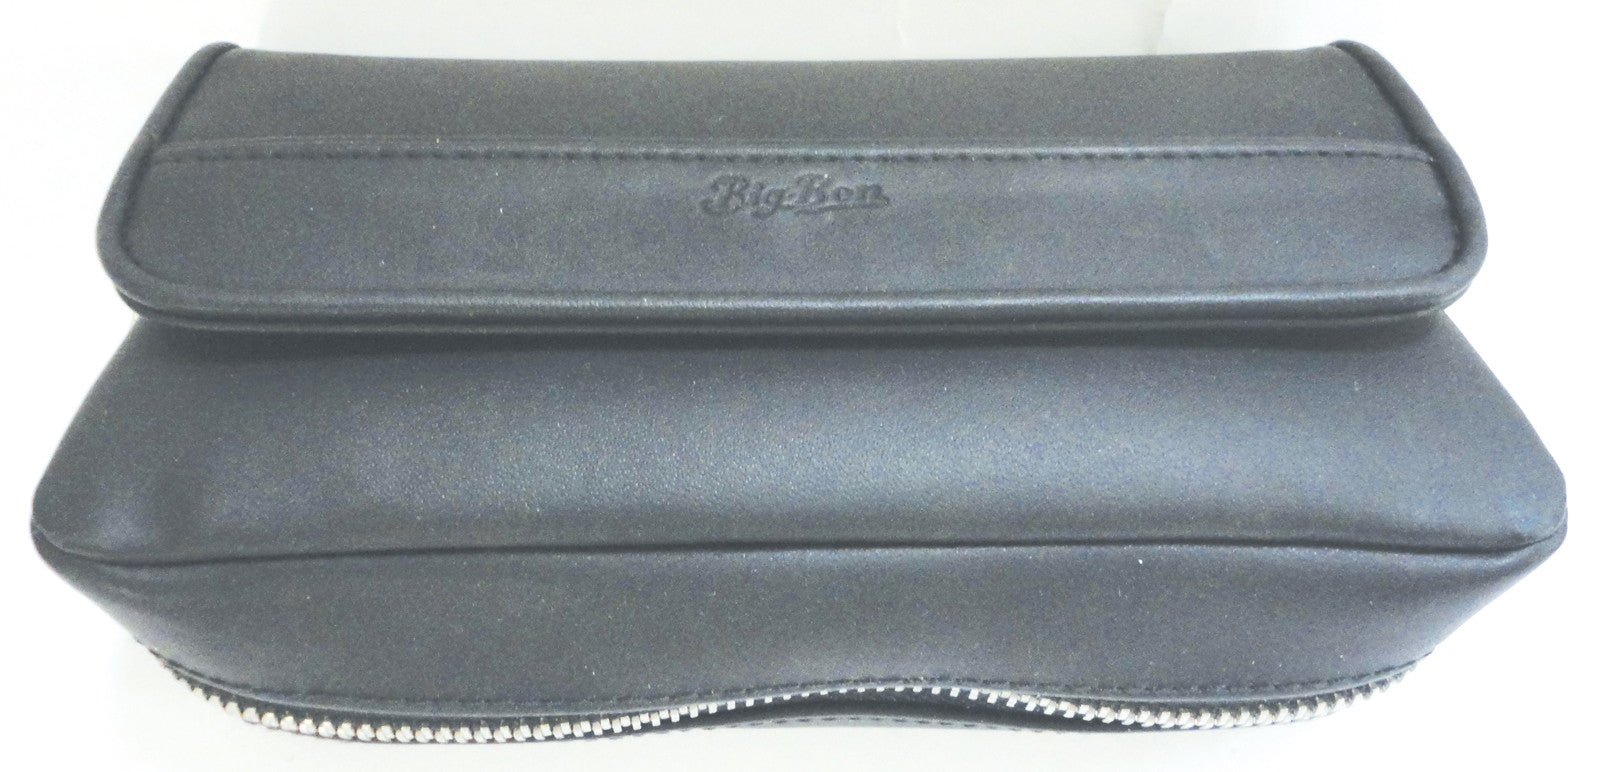 BigBen genuine leather pouch for 2 pipes & tobacco combination 743.221.220